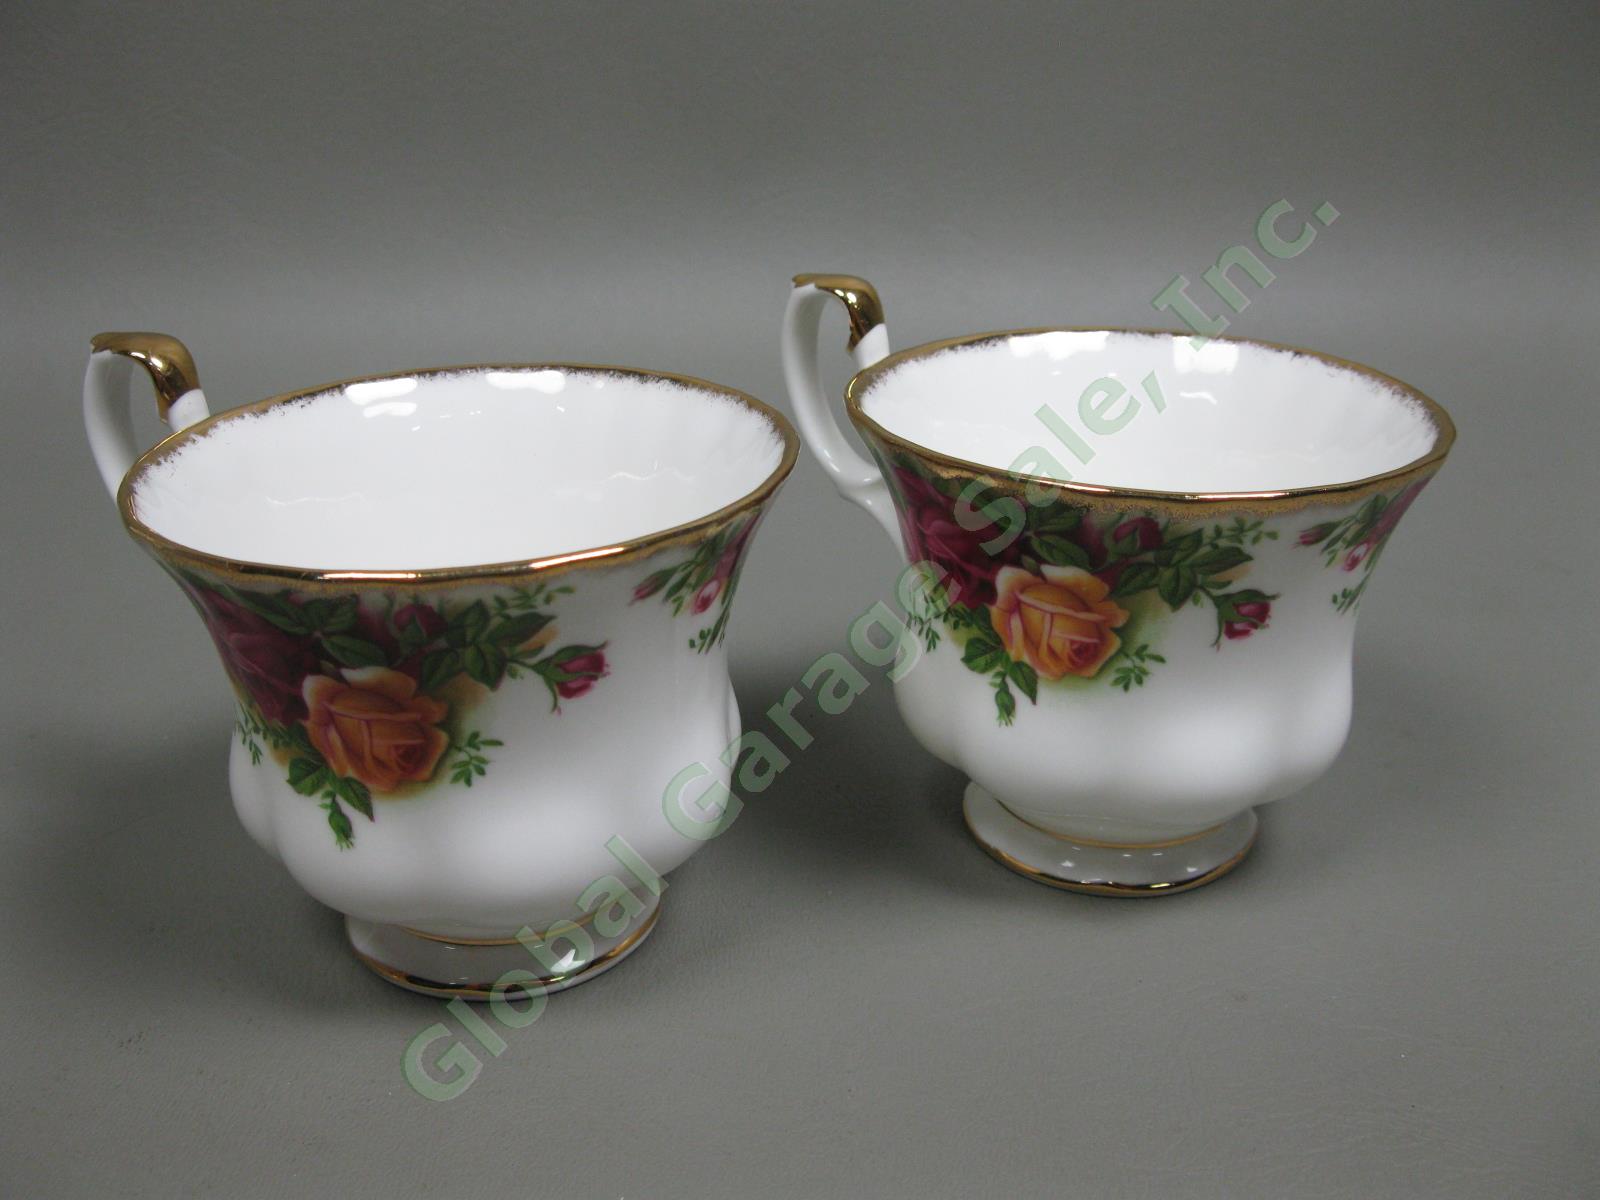 8 Royal Albert Old Country Roses Footed Tea Cup/Saucer Gold Trim Bone China Set 13